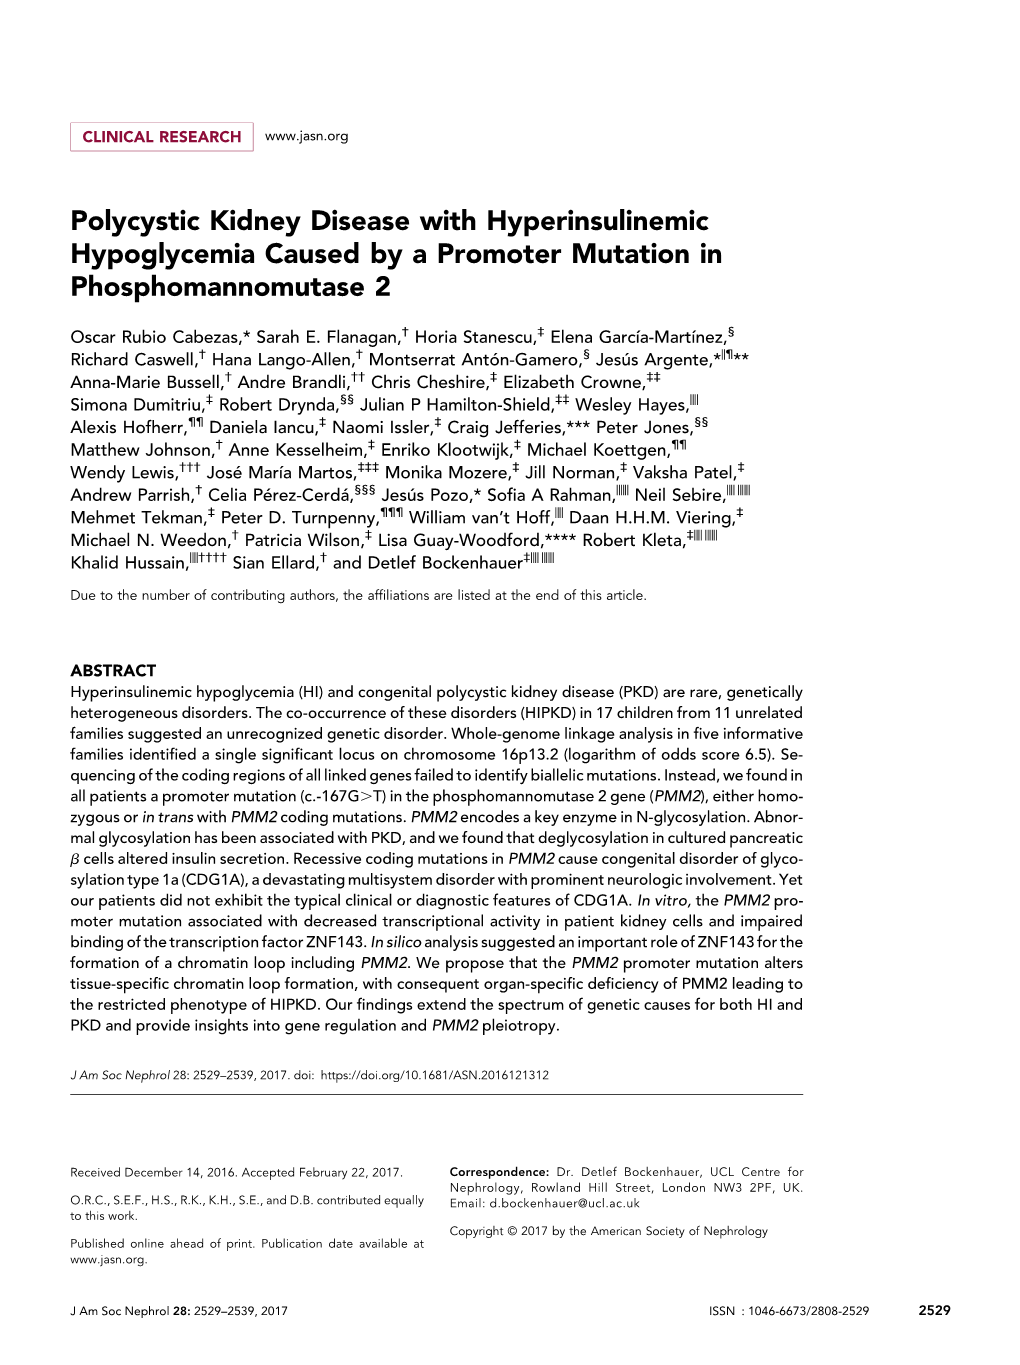 Polycystic Kidney Disease with Hyperinsulinemic Hypoglycemia Caused by a Promoter Mutation in Phosphomannomutase 2